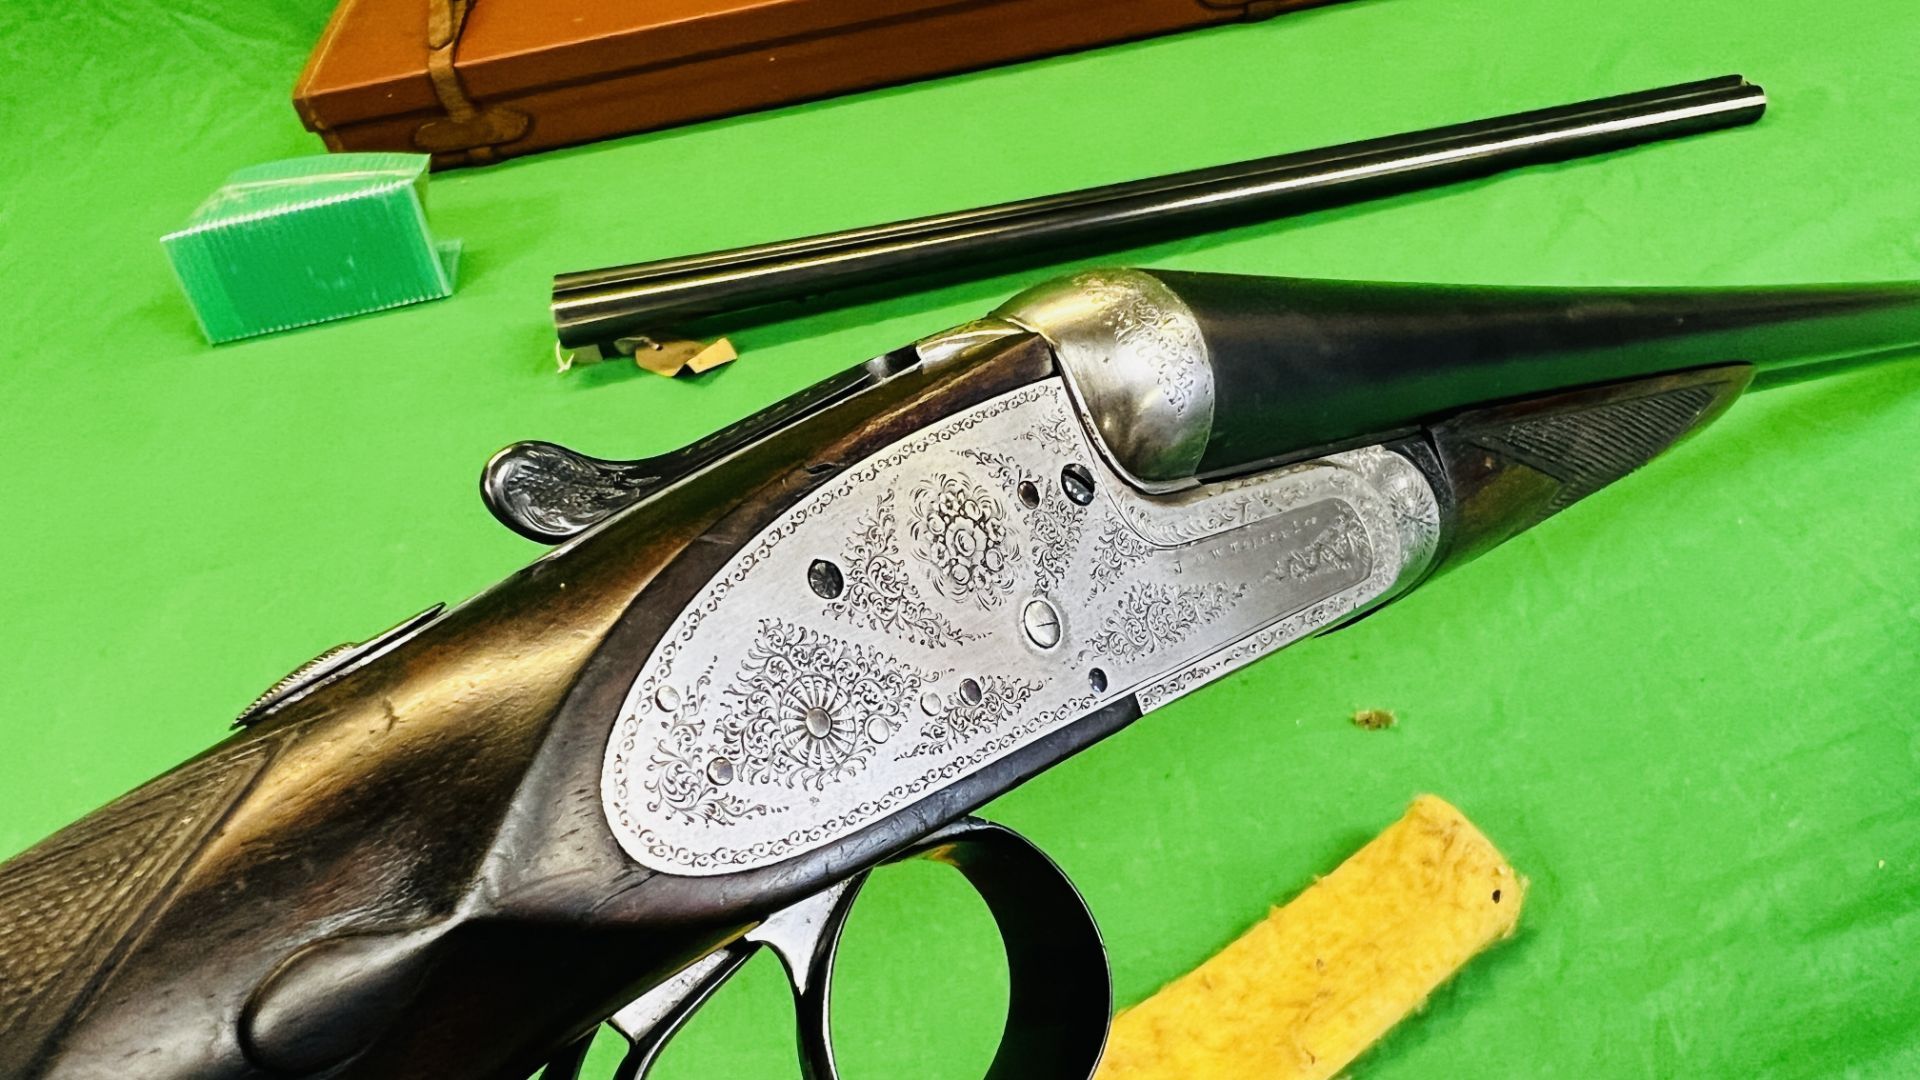 12 BORE TOLLEY SIDE BY SIDE SHOTGUN #8670, 28" BARRELS (2 3/4" CHAMBER), EJECTOR, - Image 17 of 37